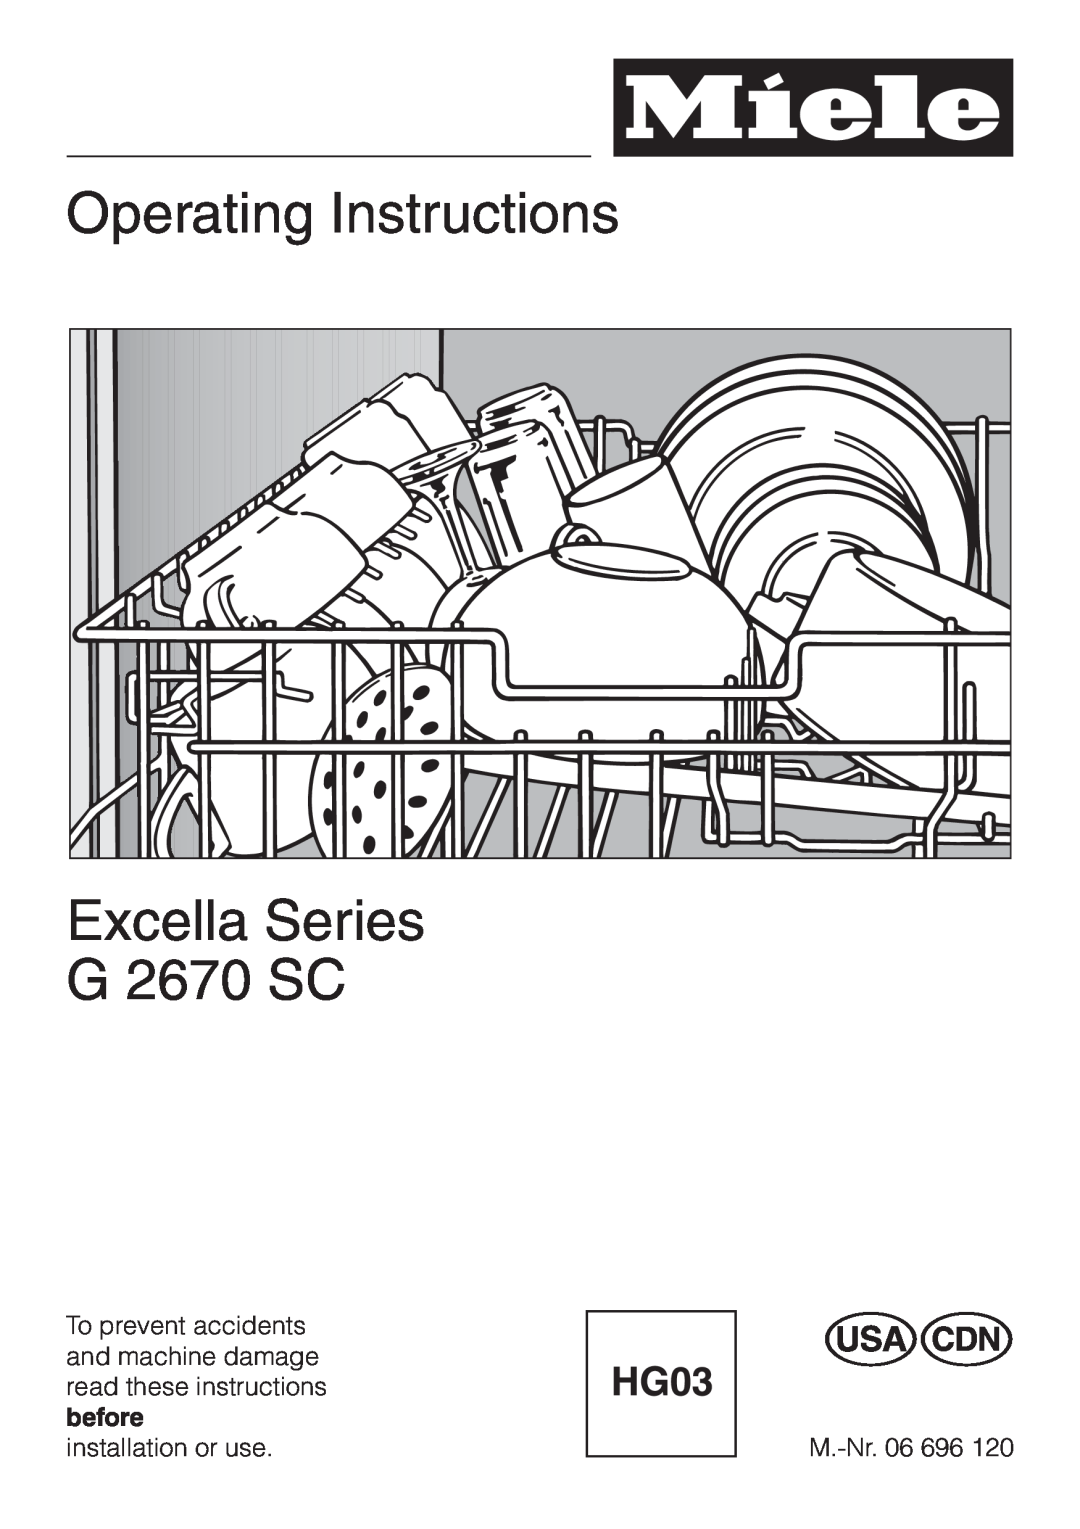 Miele manual Operating Instructions Excella Series G 2670 SC 